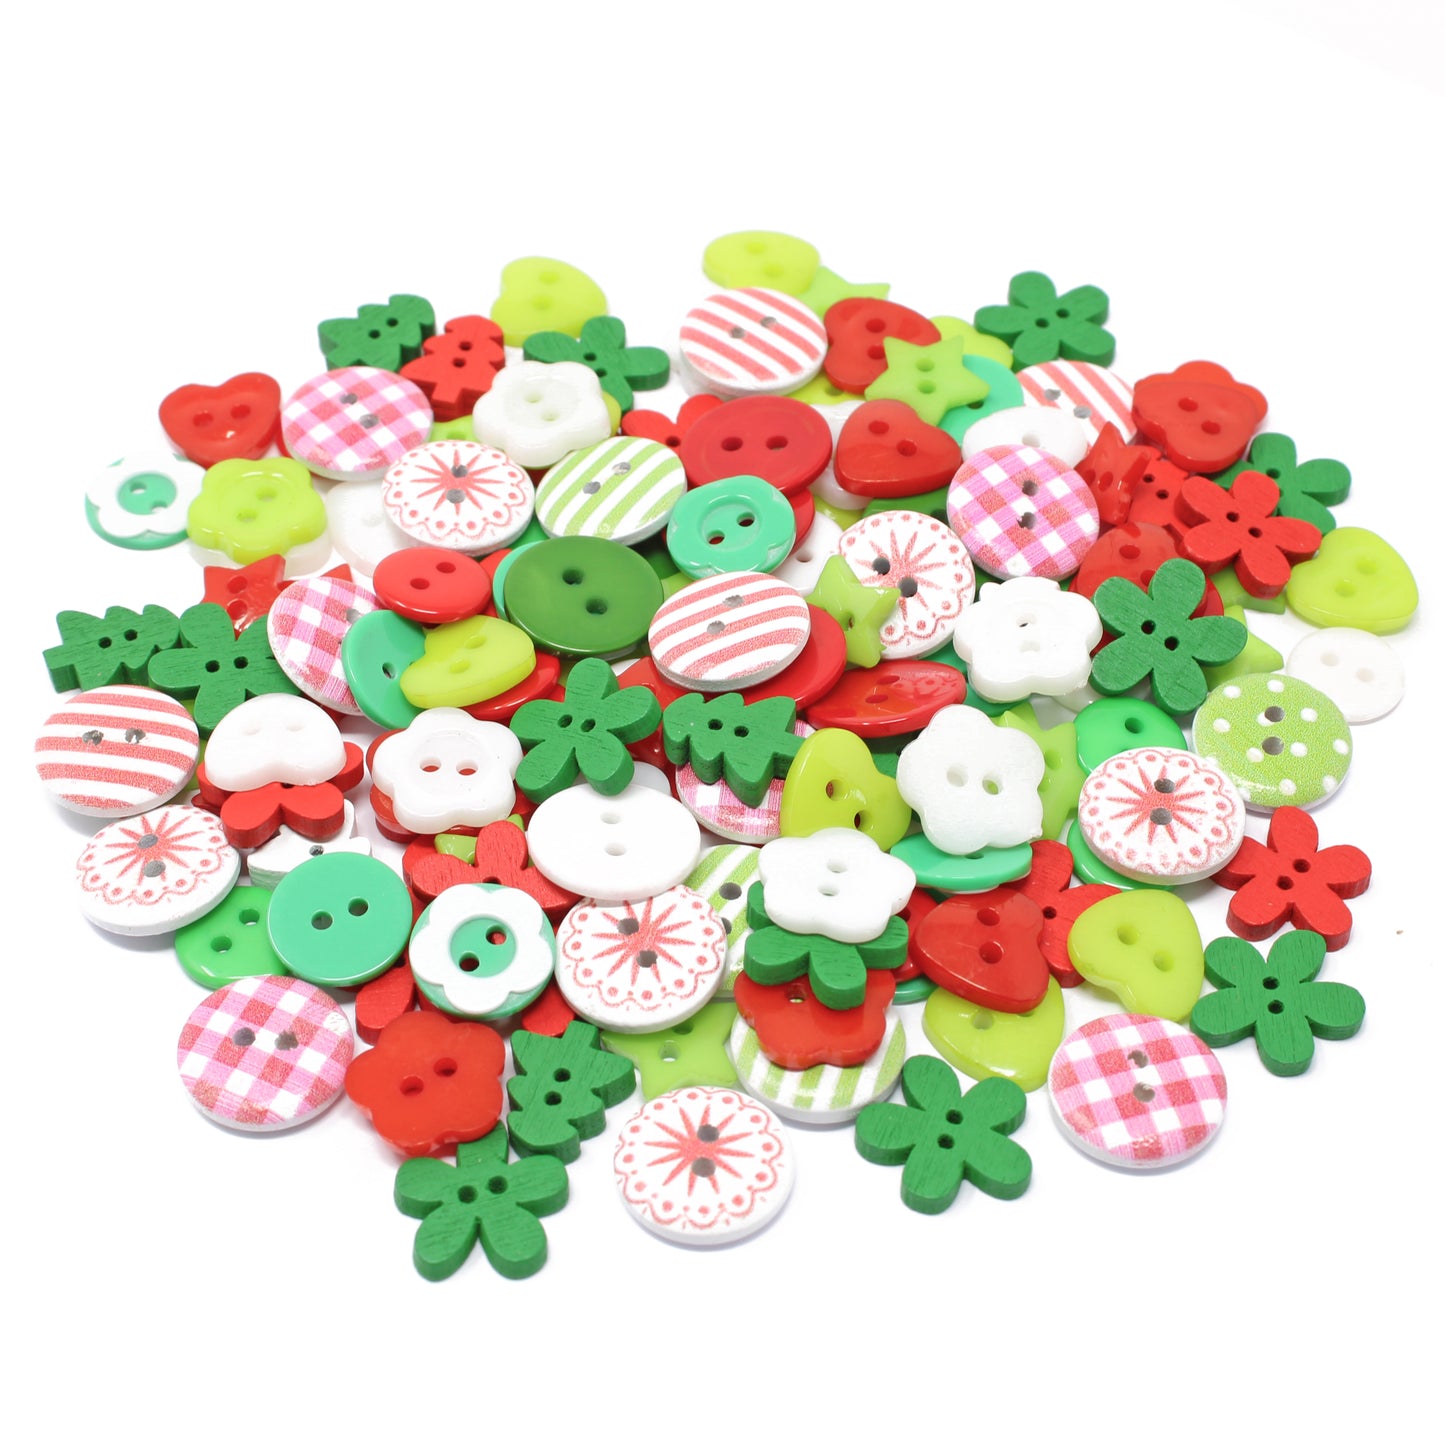 Christmas Mix Buttons 150 Mix Wood Acrylic & Resin Buttons